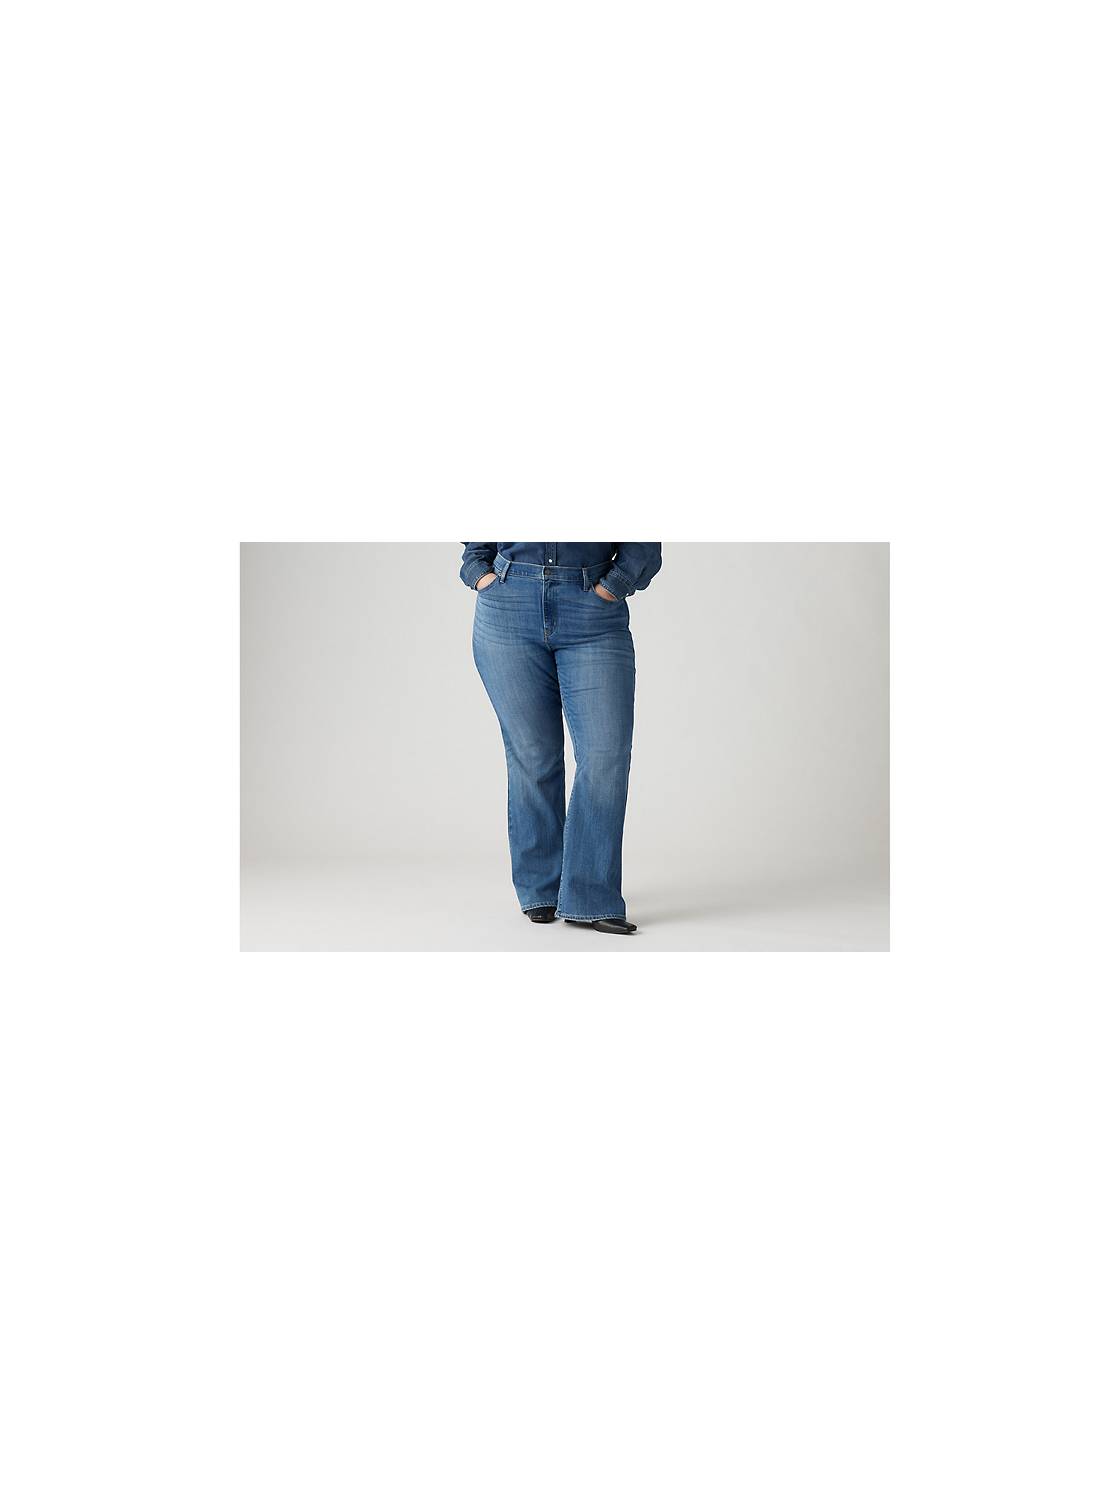 NEW Habitat Clothes To Live In Women's Medium Wash High Waist Boot Cut  Jeans. 4.